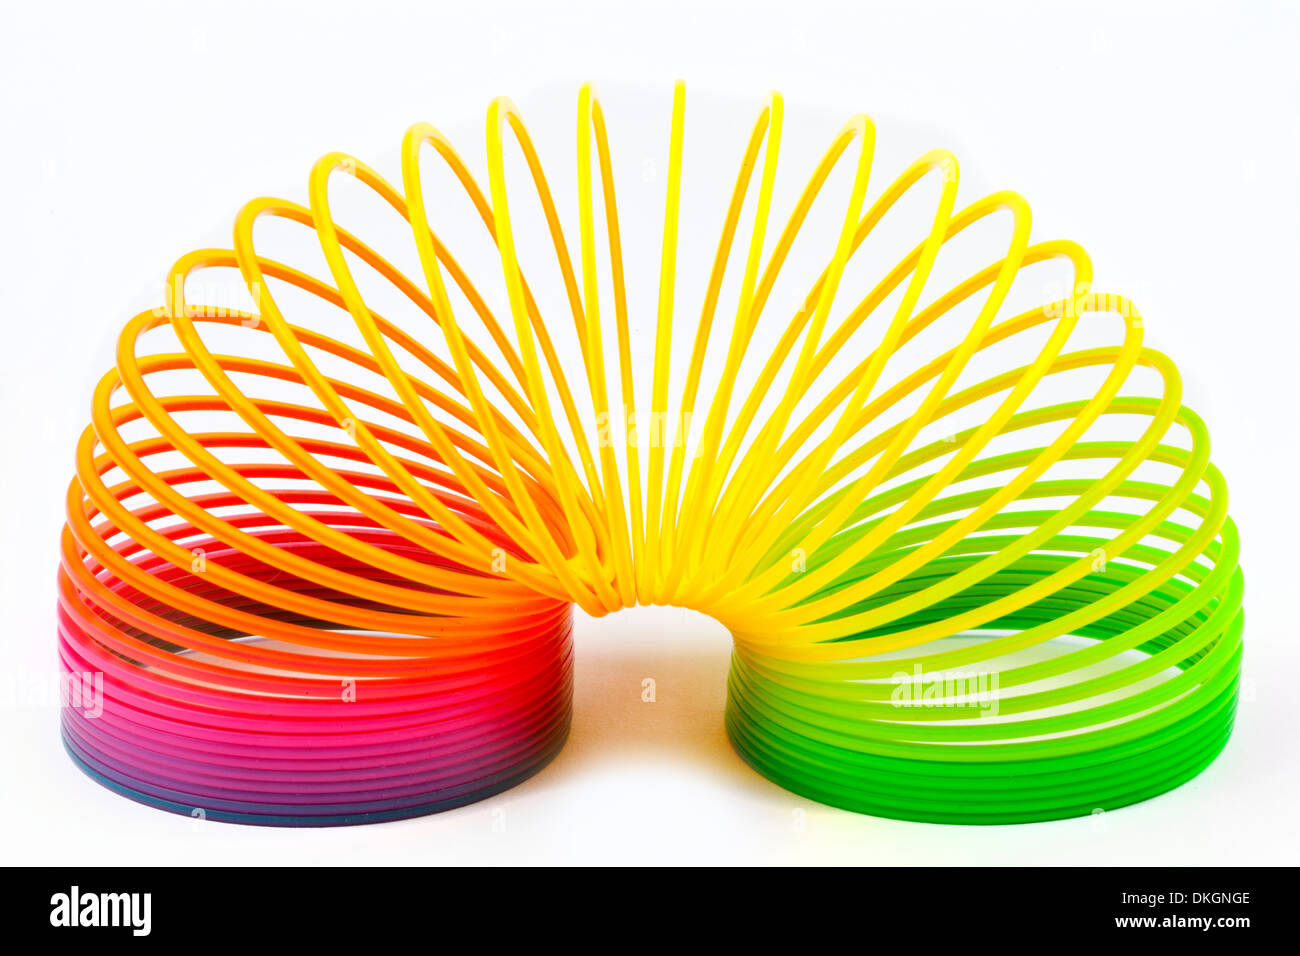 Slinky Toy isolated over a plain white background. Stock Photo